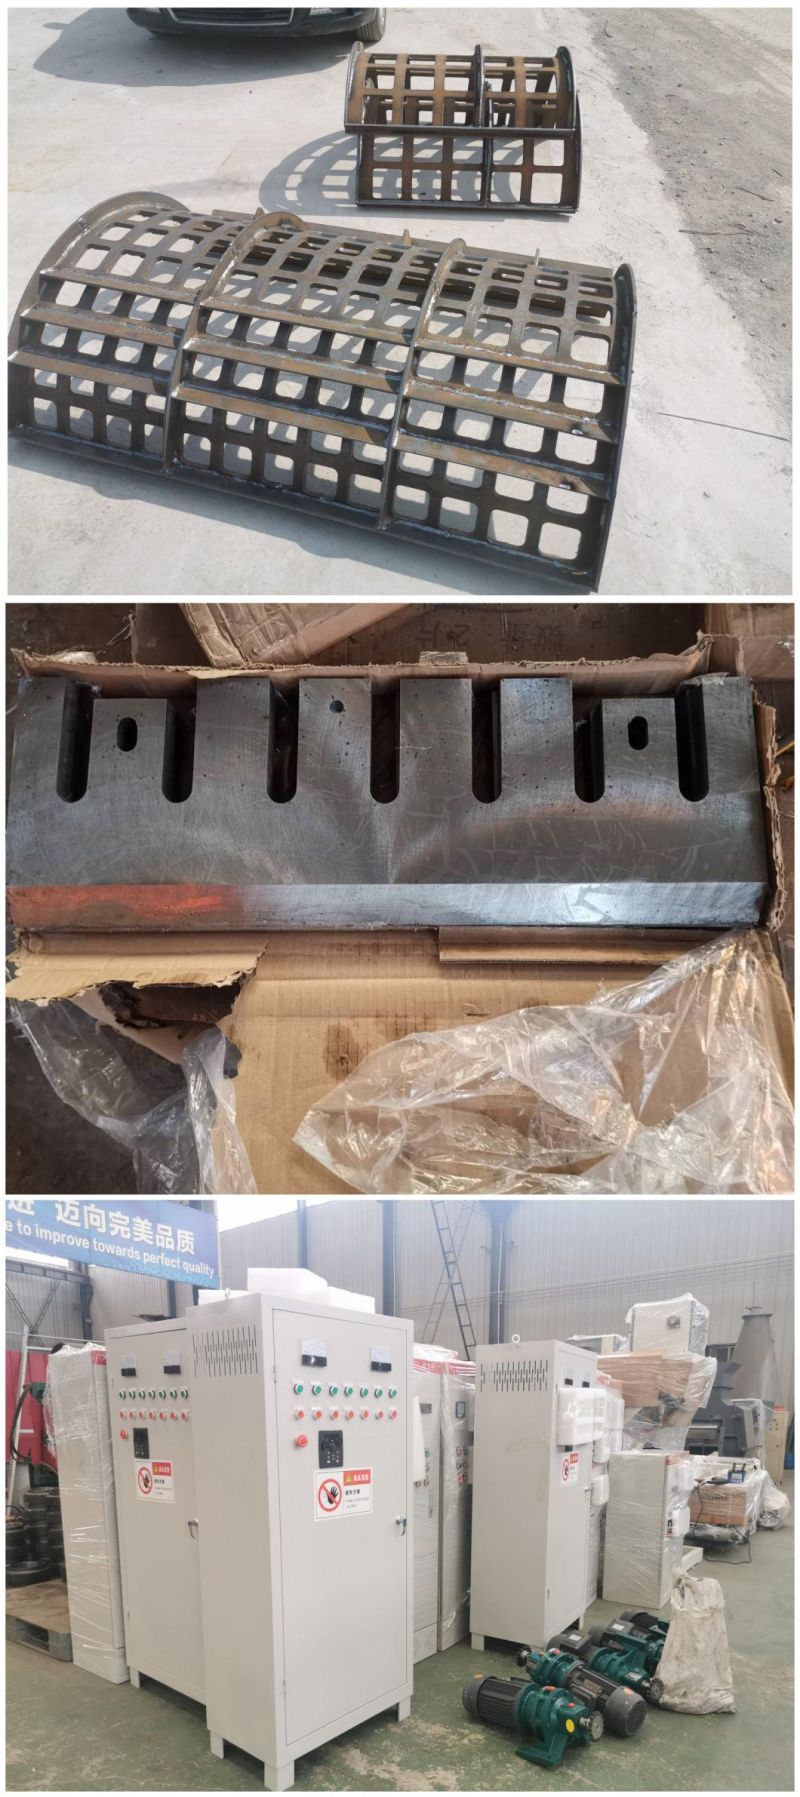 China Factory Wood Chipper Shredder for Sale